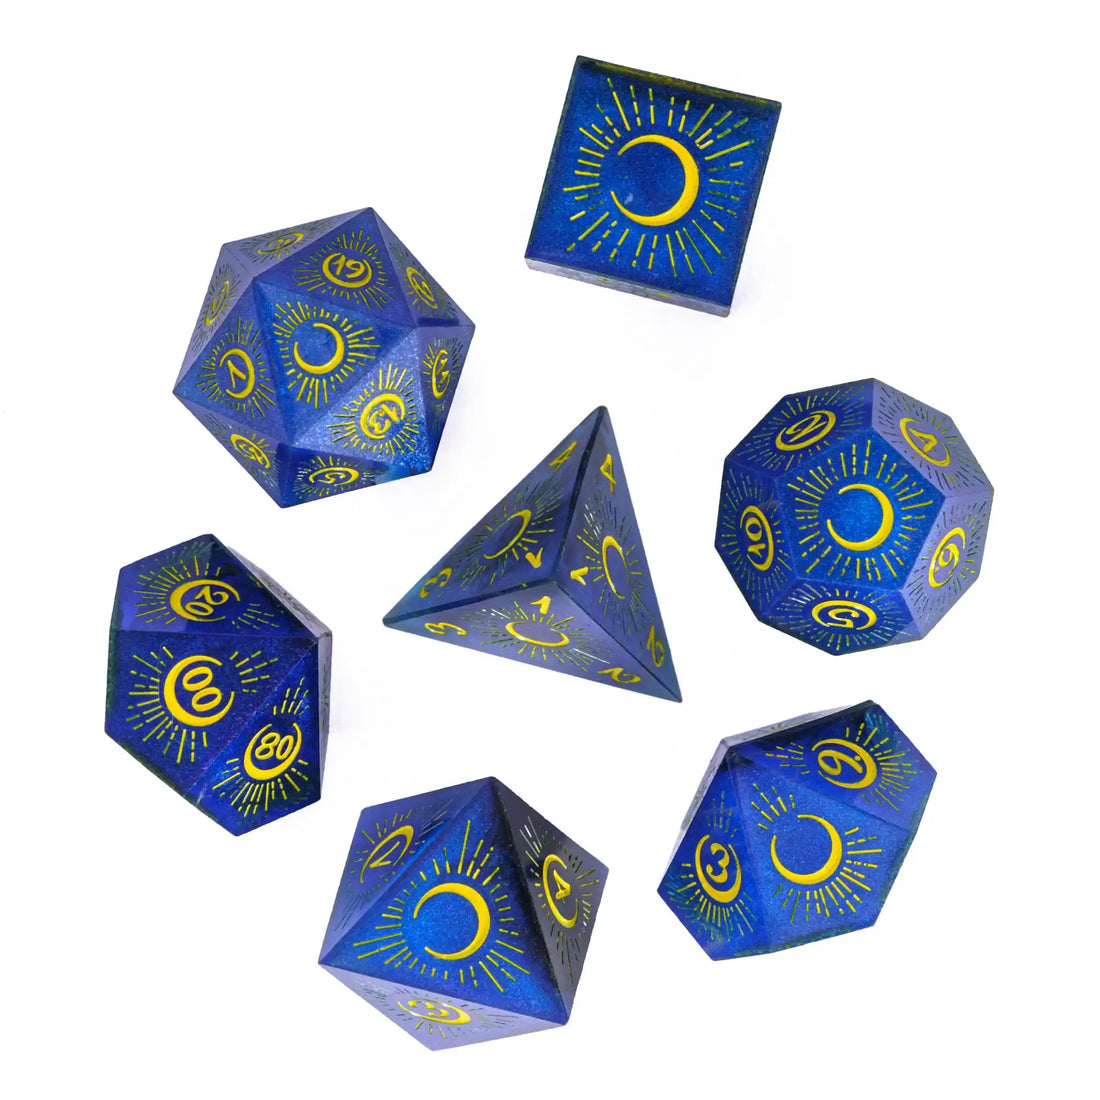 Cusdie 7Pcs Moon Eclipses DND Dice Rising Moon Sharp Edges D&D Dice Handcrafted Polyhedral Dice Set for Role Playing Game